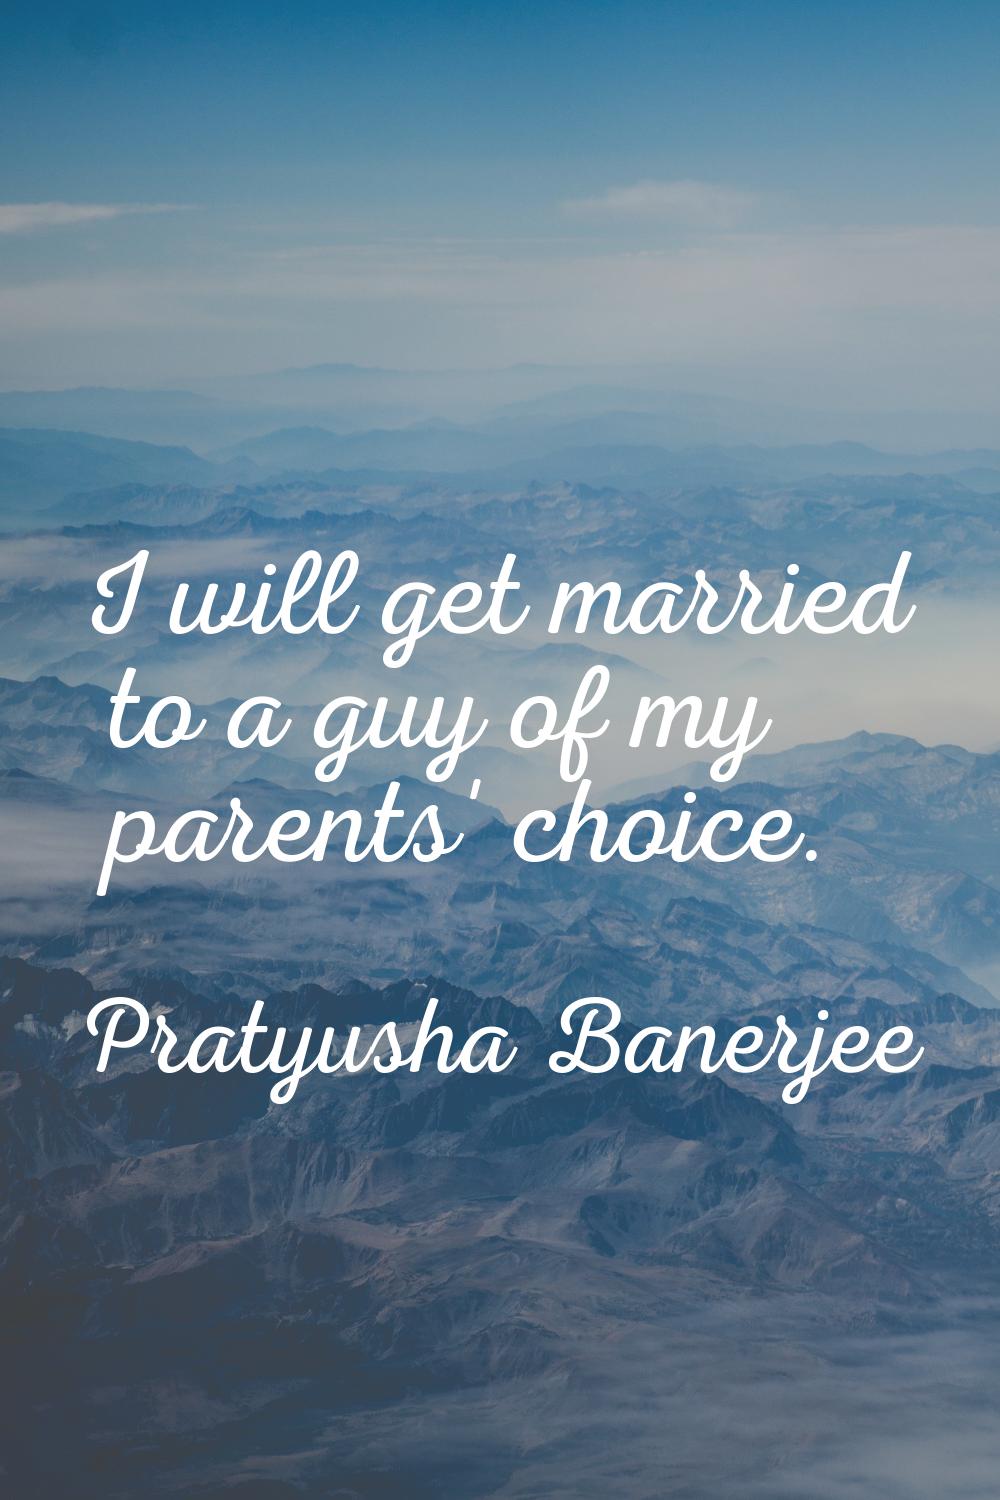 I will get married to a guy of my parents' choice.